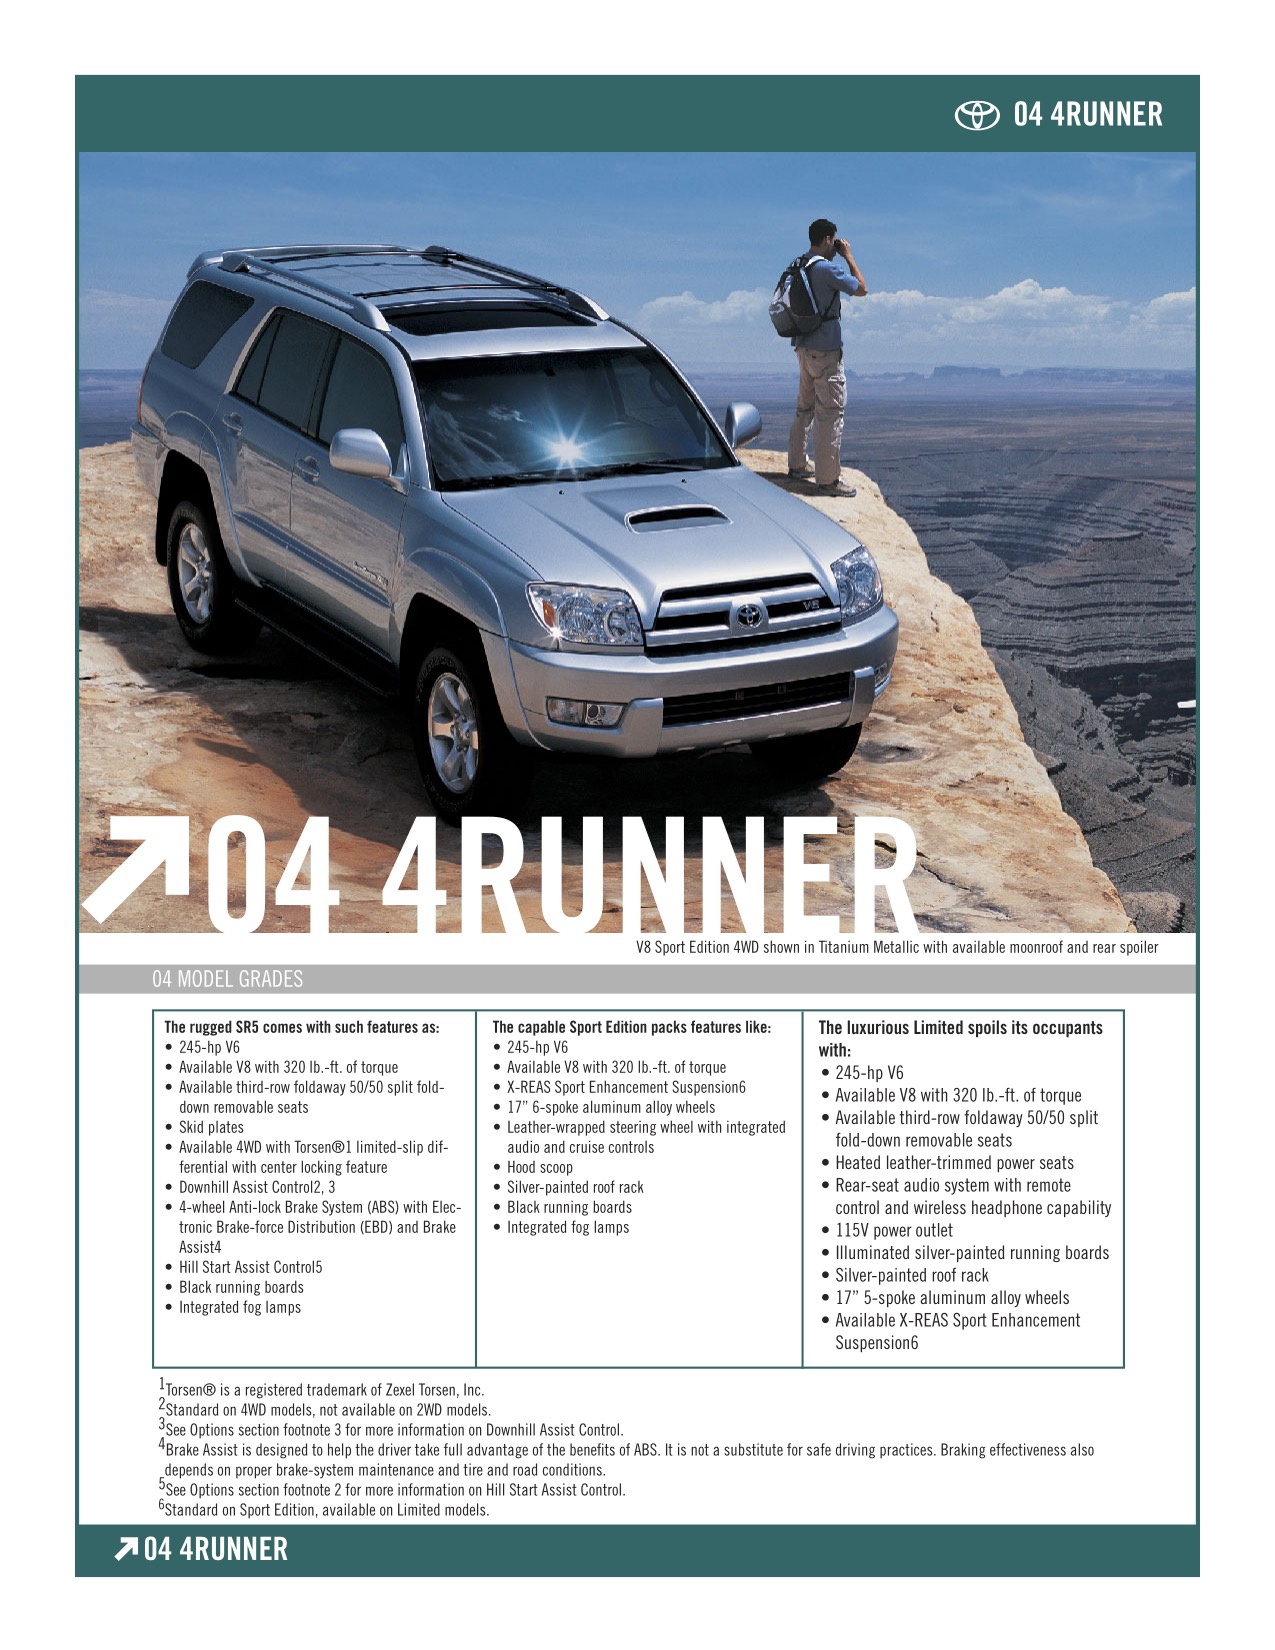 2004 Toyota 4Runner Brochure Page 1